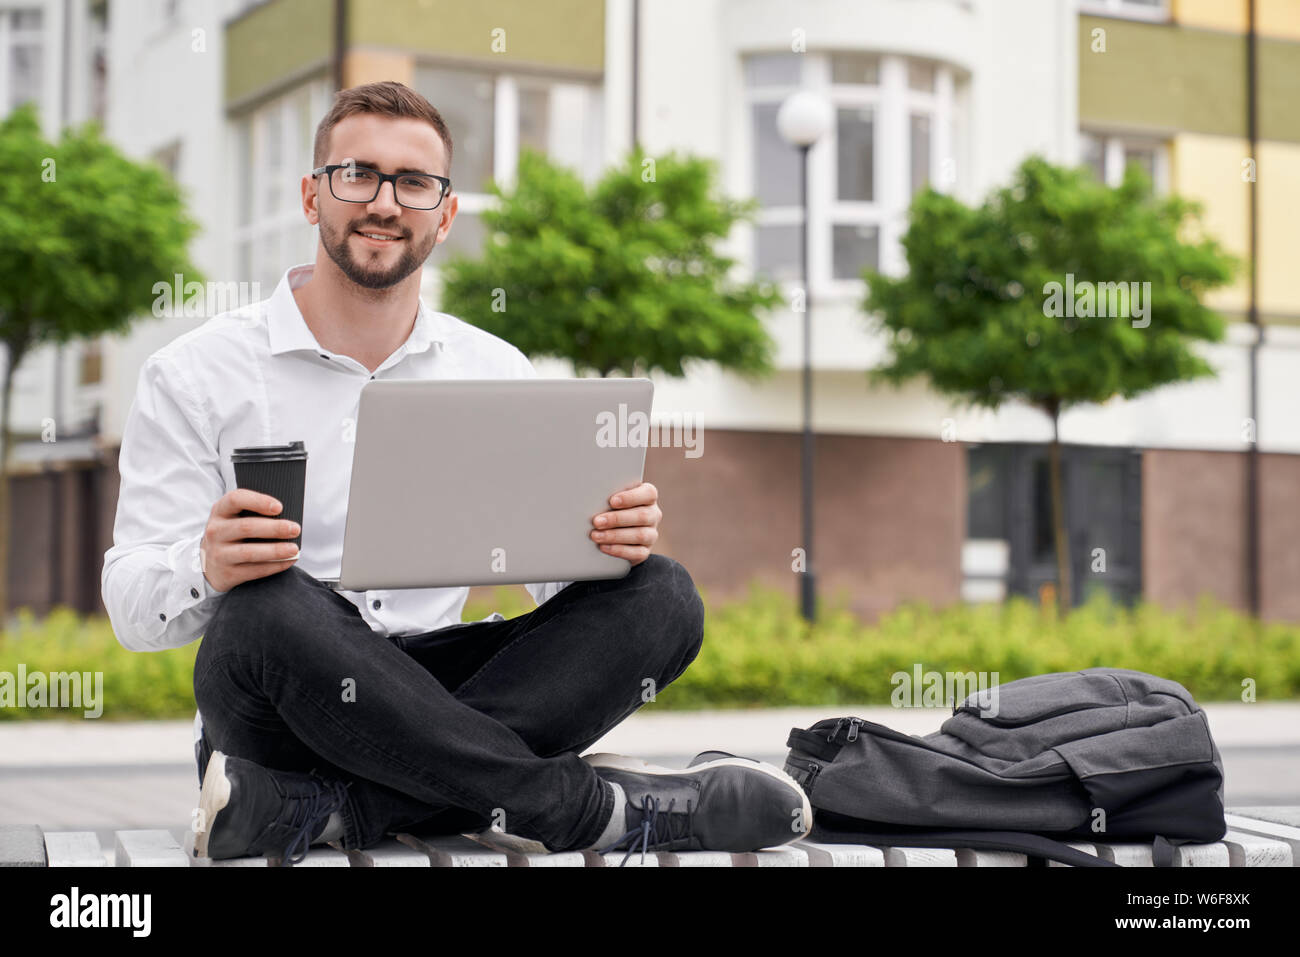 Handsome, positive programmer sitting on bench with crossed legs, holding laptop on knees, looking at camera. Young man in glasses holding coffee cup, posing on background of building. Stock Photo